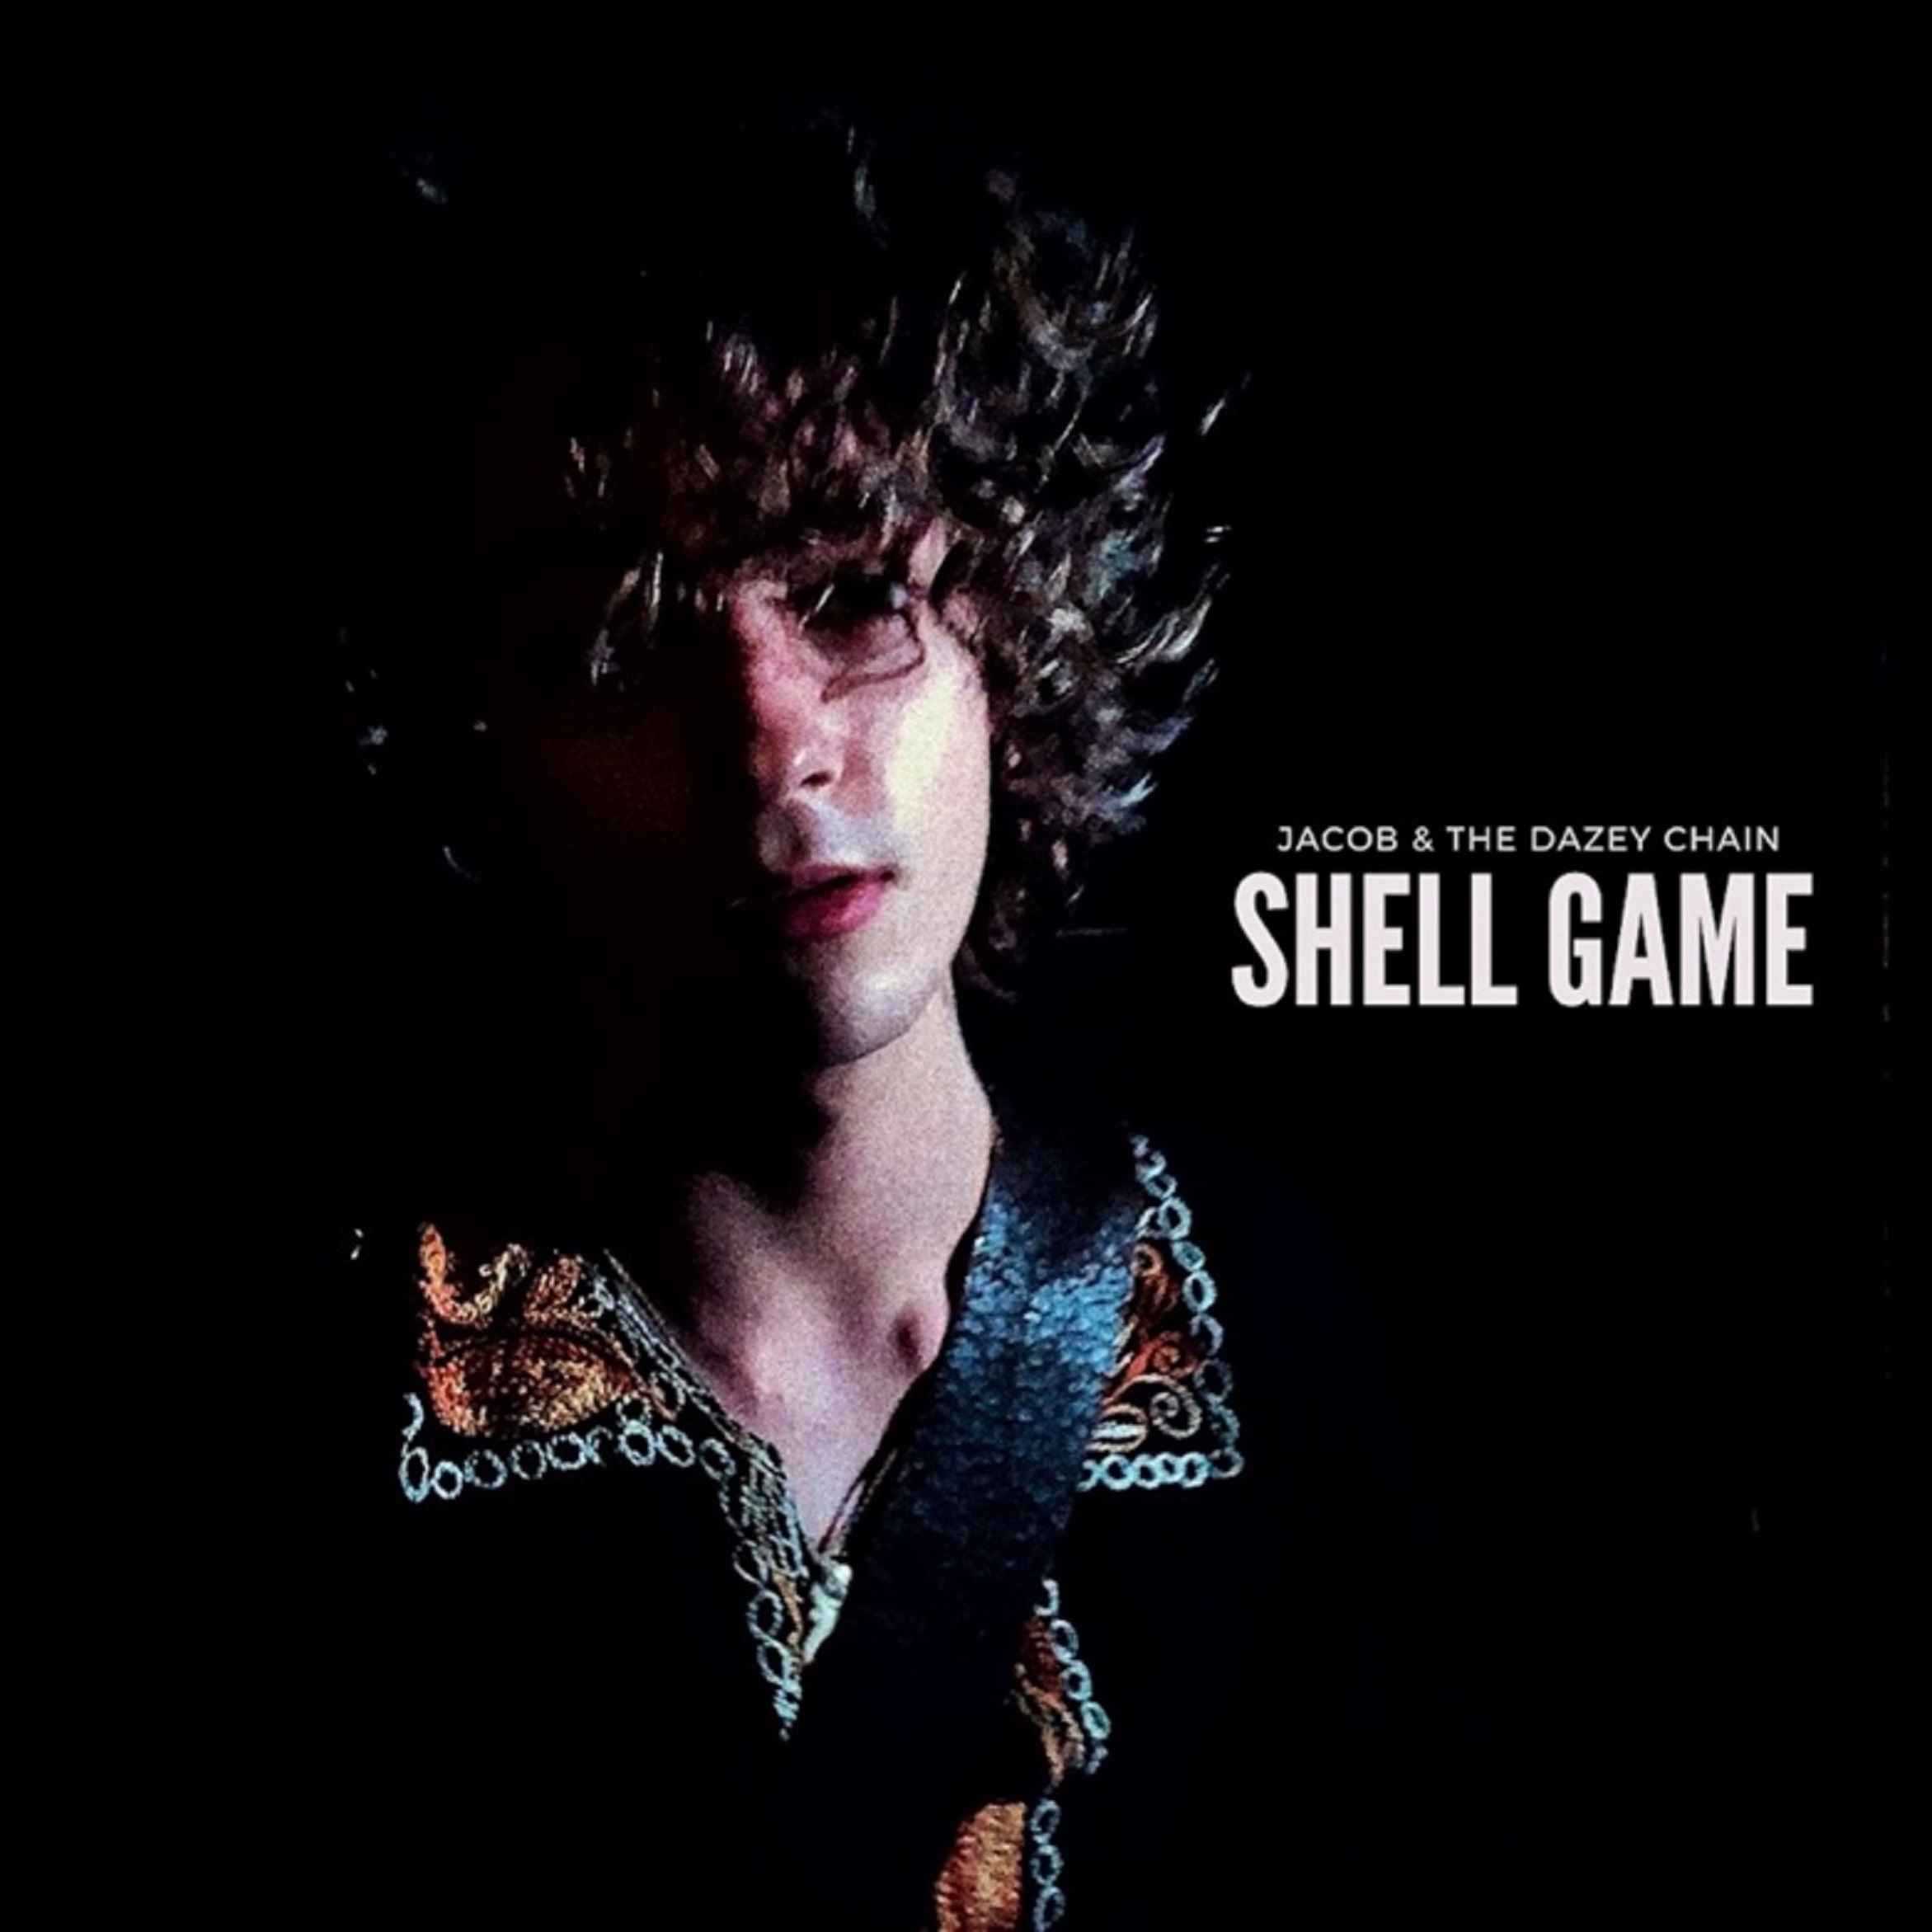 JACOB & THE DAZEY CHAIN Release new single “SHELL GAME”